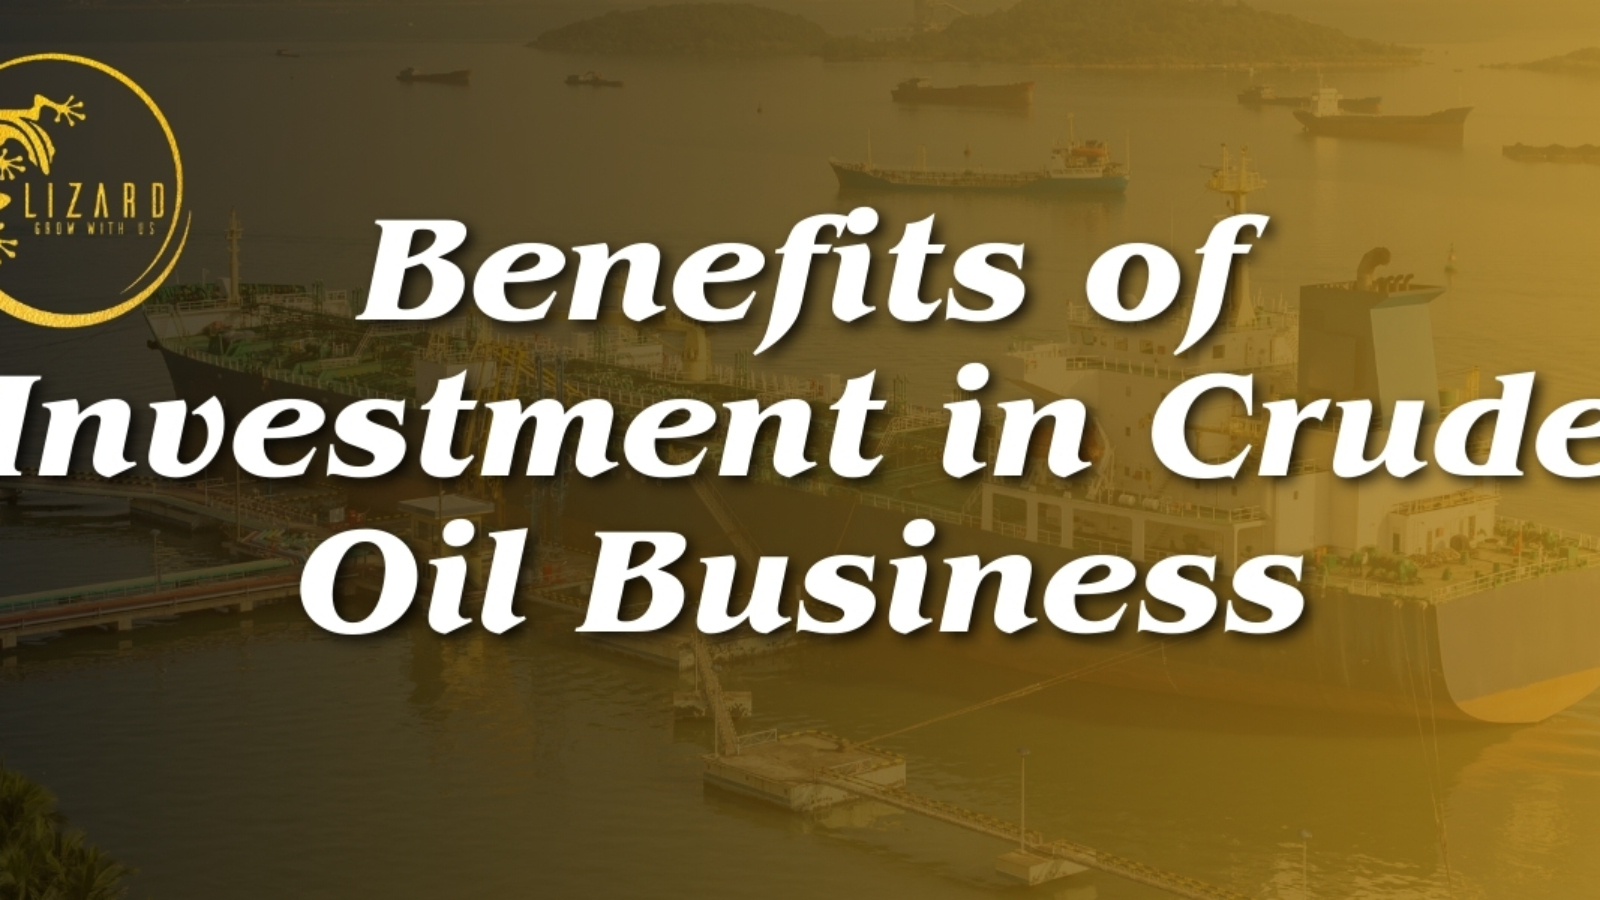 Benefits of Investment in Crude Oil Business